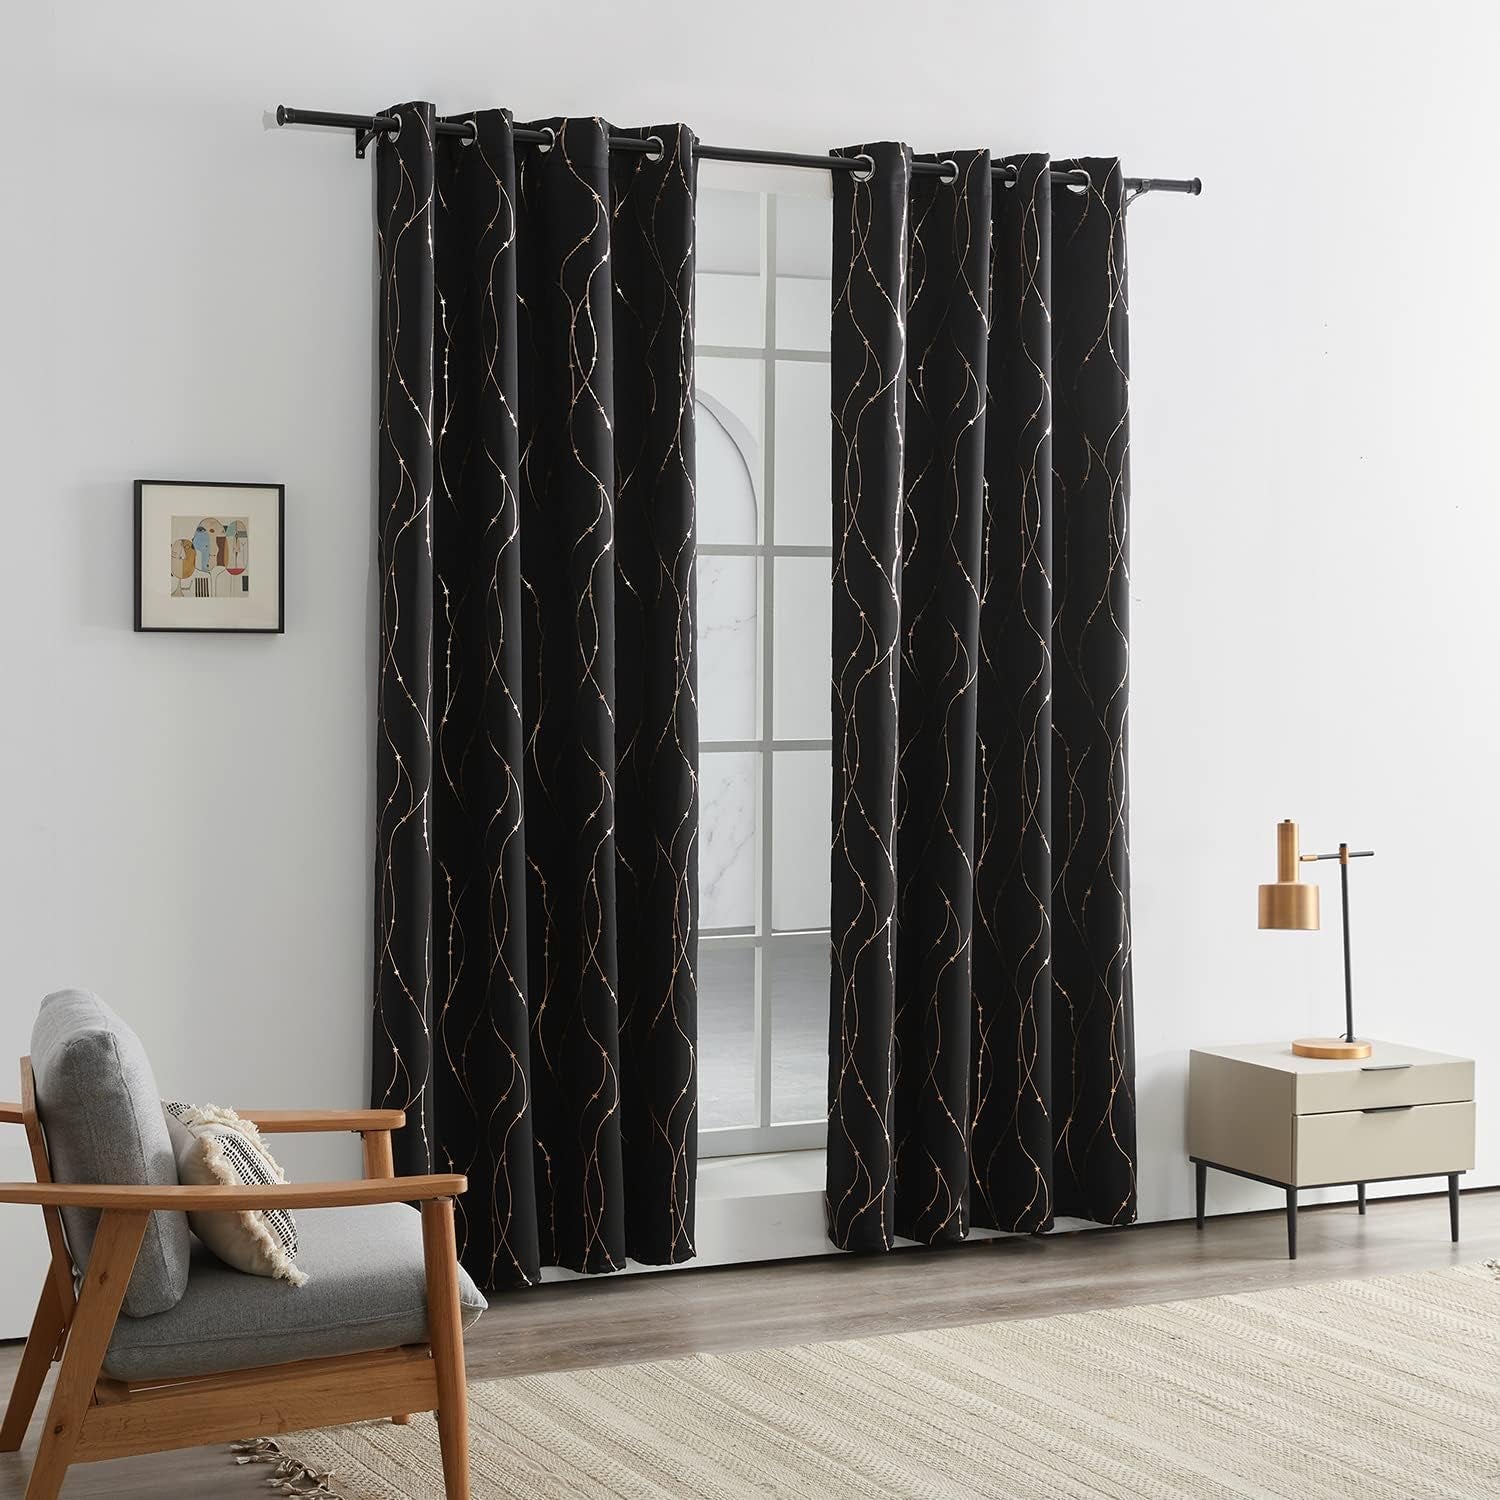 SMILE WEAVER Black Blackout Curtains for Bedroom 72 Inch Long 2 Panels,Room Darkening Curtain with Gold Print Design Noise Reducing Thermal Insulated Window Treatment Drapes for Living Room  SMILE WEAVER   